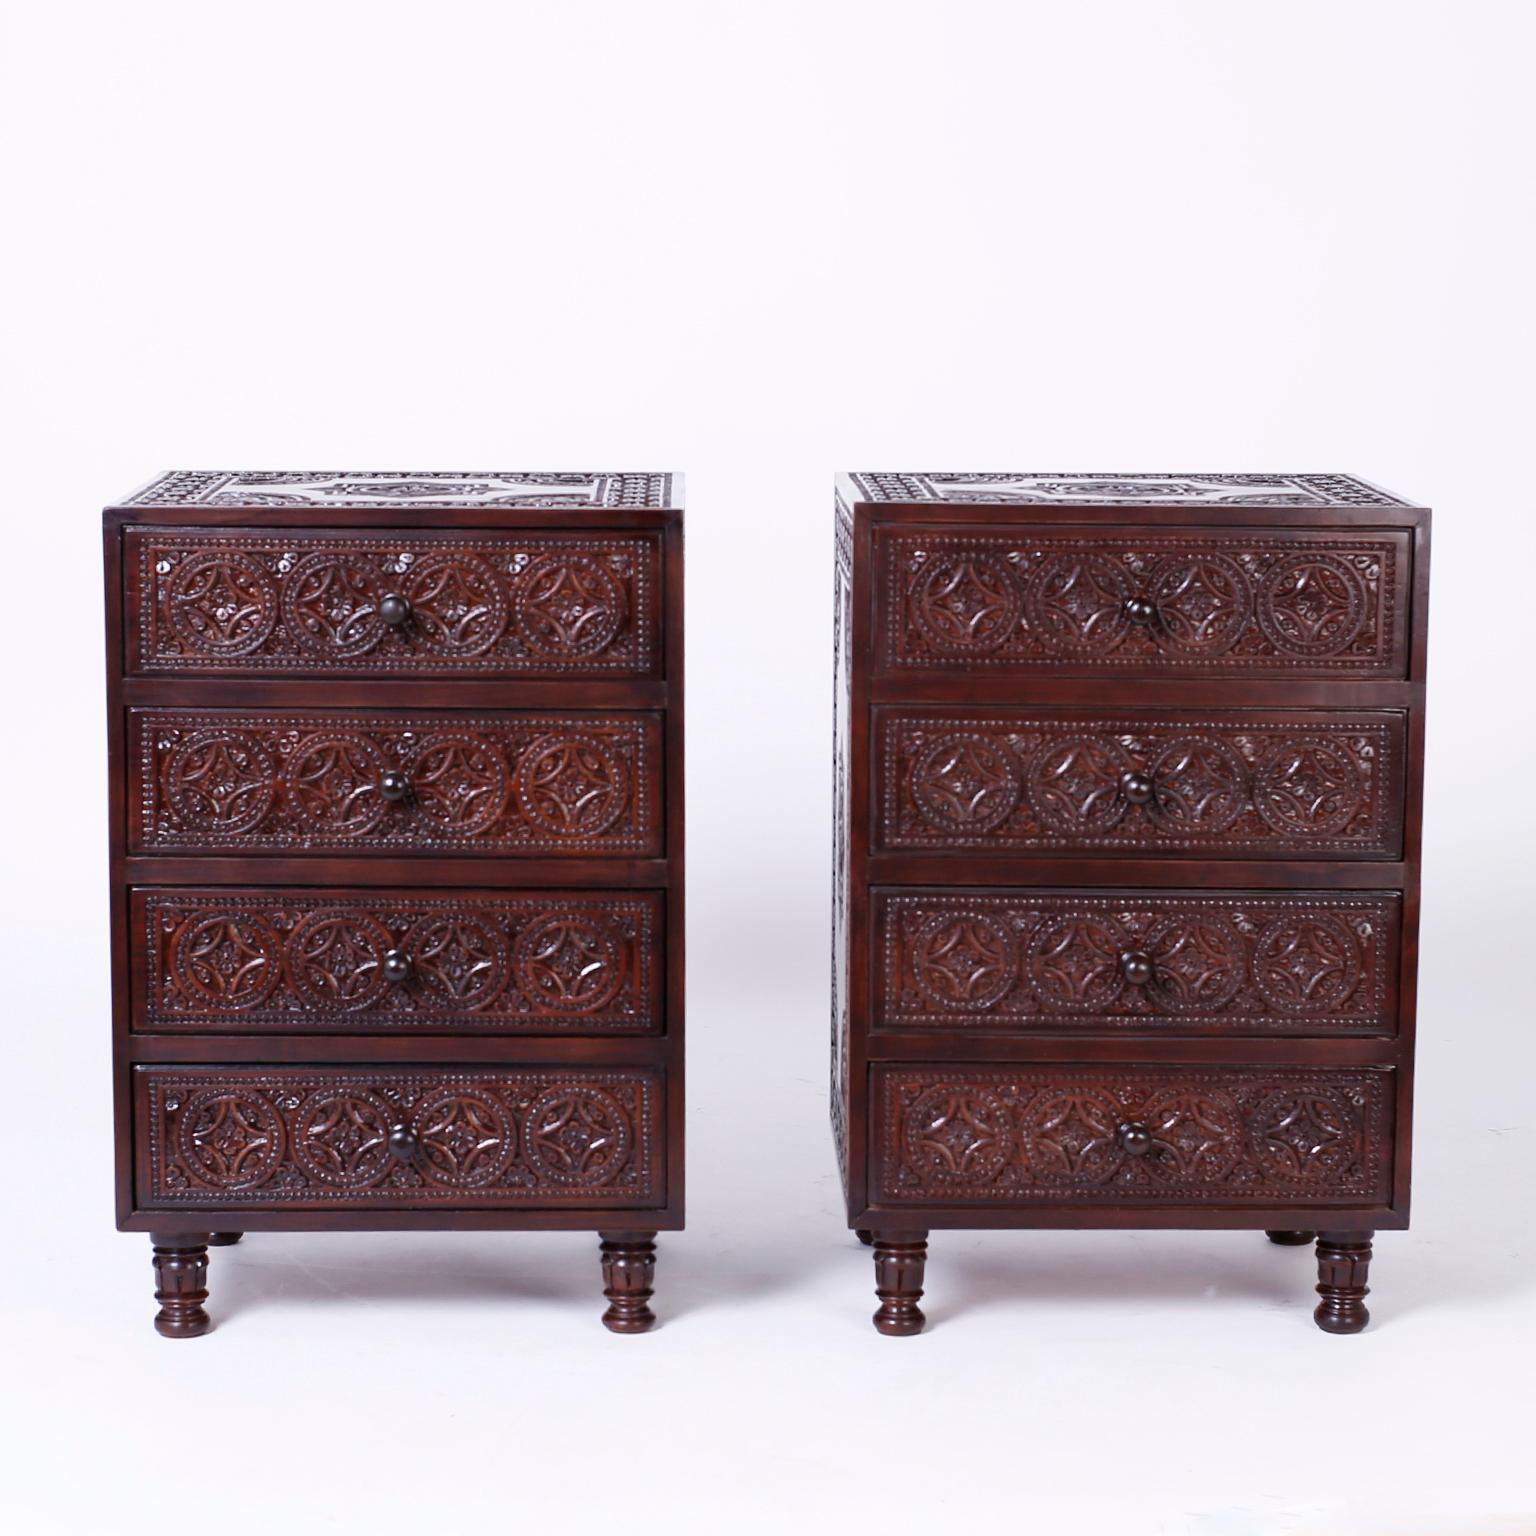 Pair of exotic Anglo-Indian four drawer mahogany nightstands or chests expertly carved on the top, sides and front with floral designs and medallions and set on carved and turned feet.